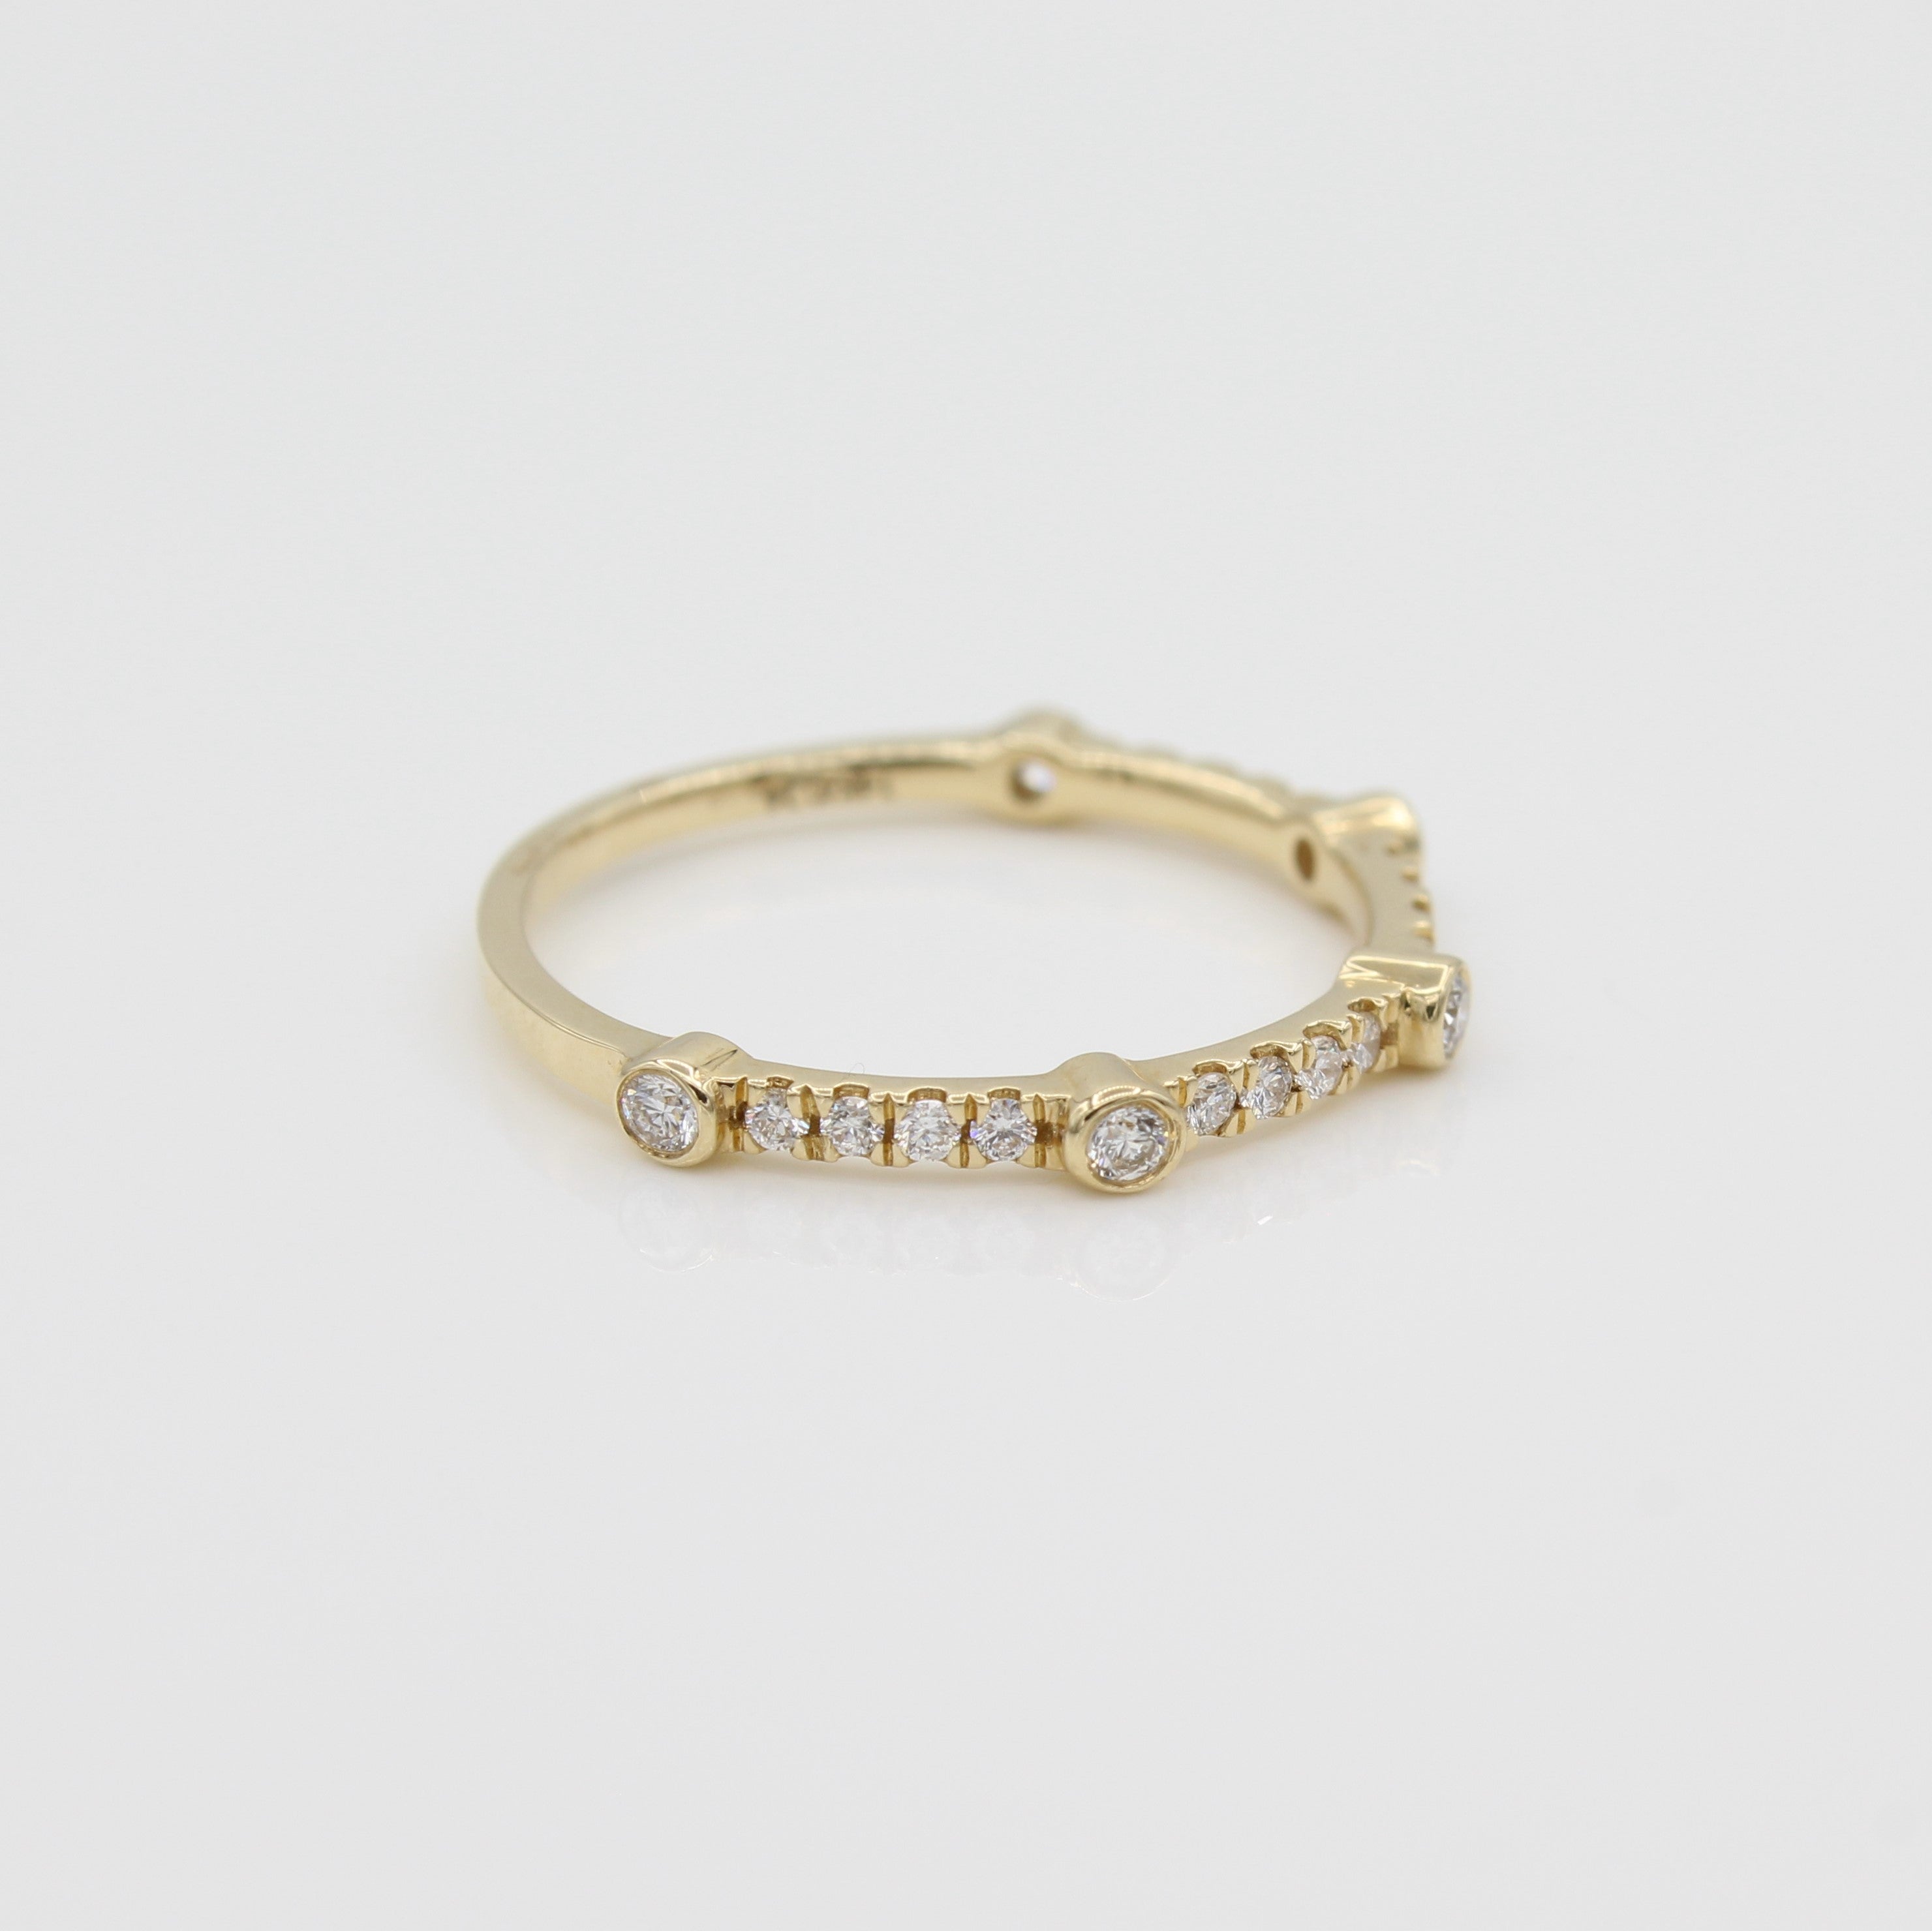 14k Yellow Gold Bezel-Set Diamond 5 Station Ring with Micro-Pave Band, side view from left.